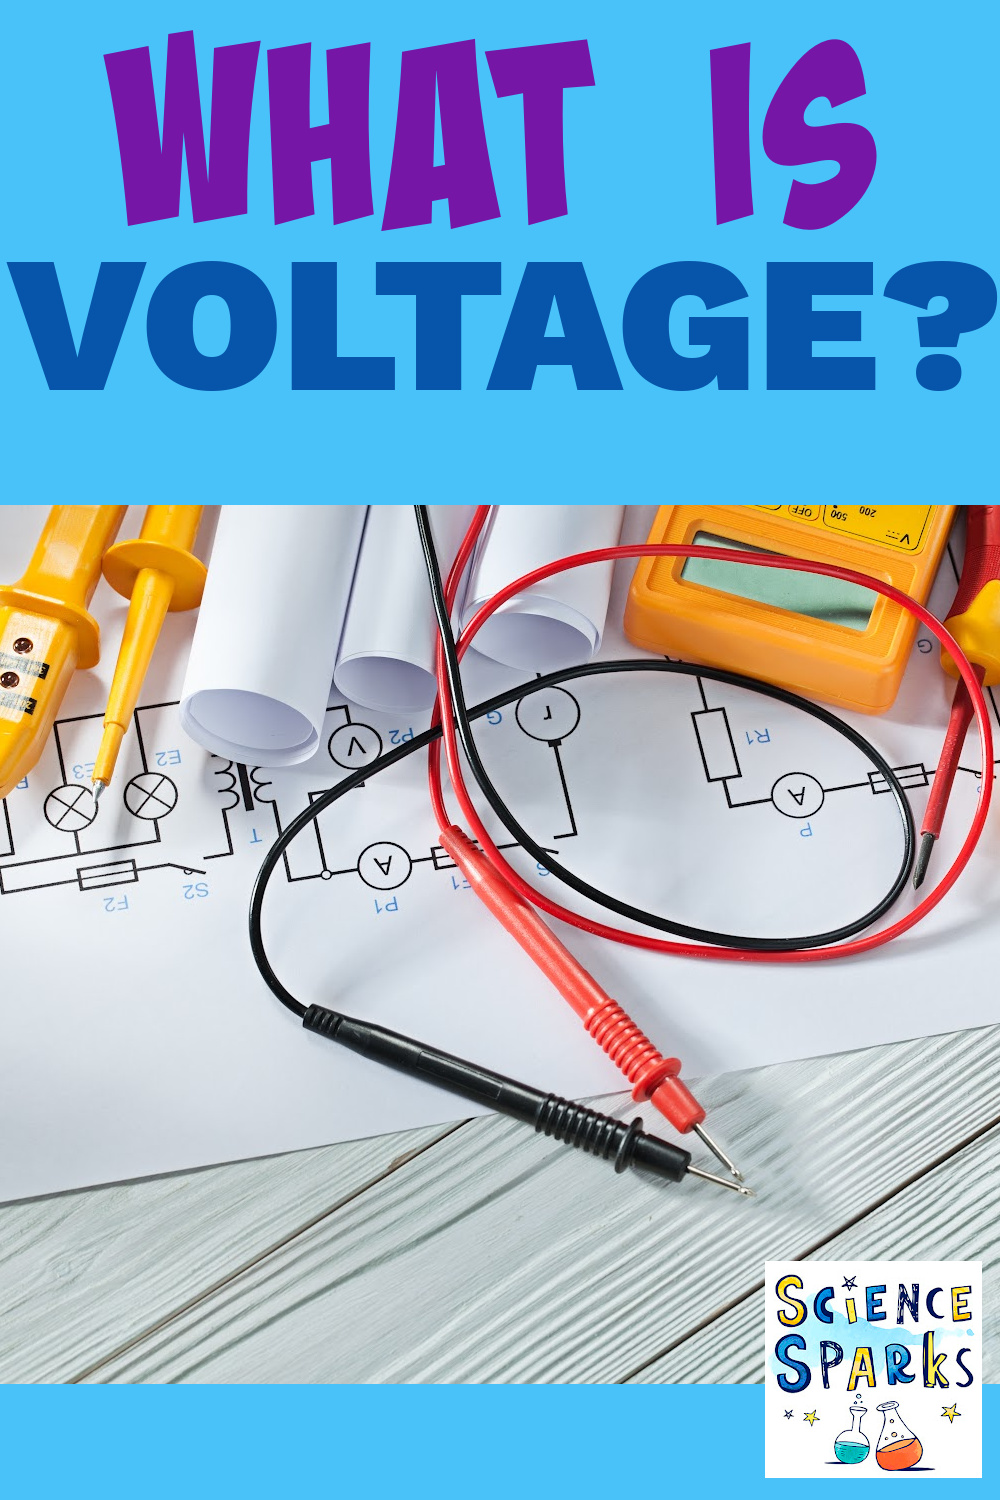 What is voltage? Learn about voltage and current with these simple electricity demonstrations